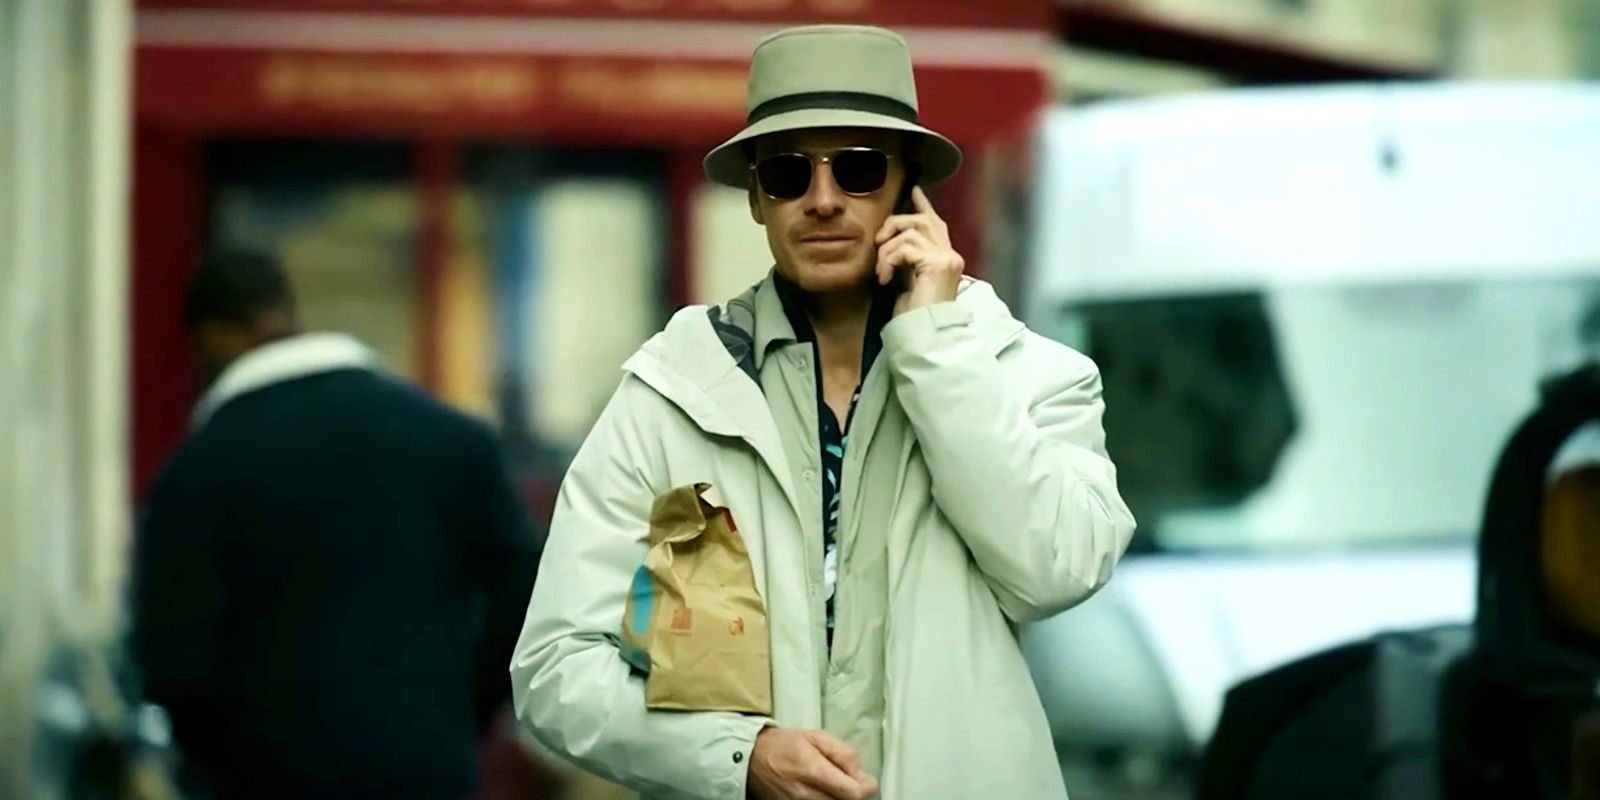 Michael Fassbender talking on the phone in The Killer